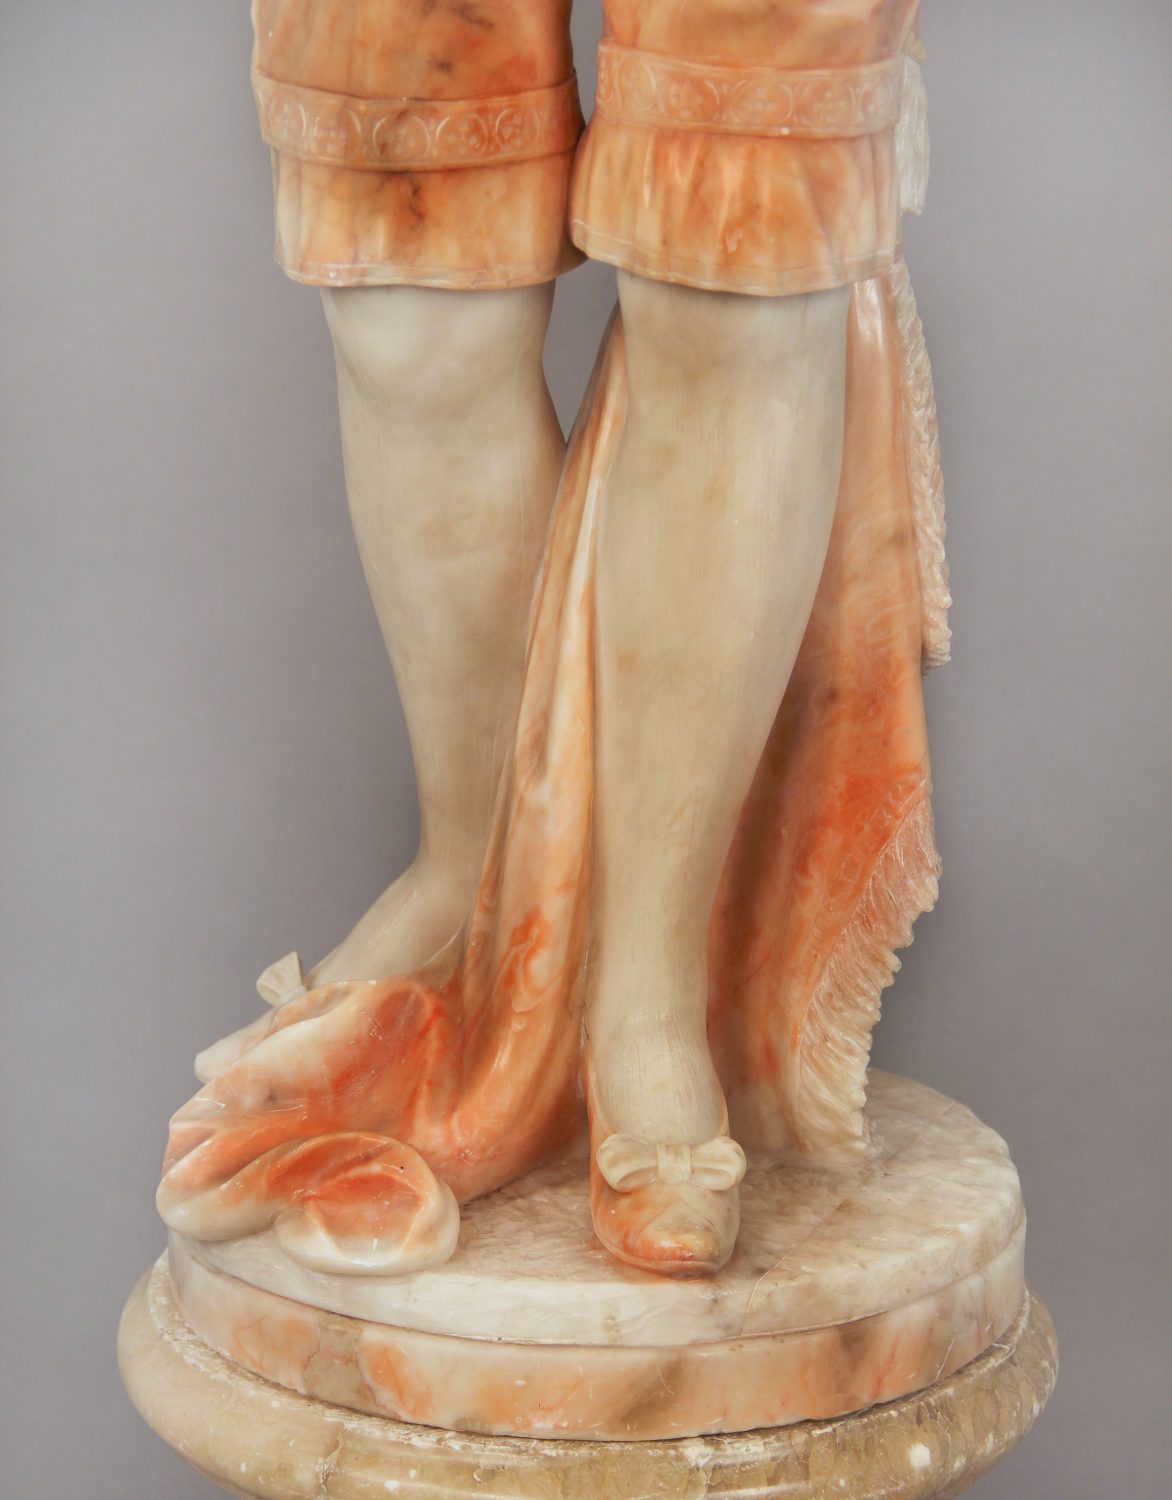 Lot 462 - AN ITALIAN CARVED ALABASTER FIGURE OF THE